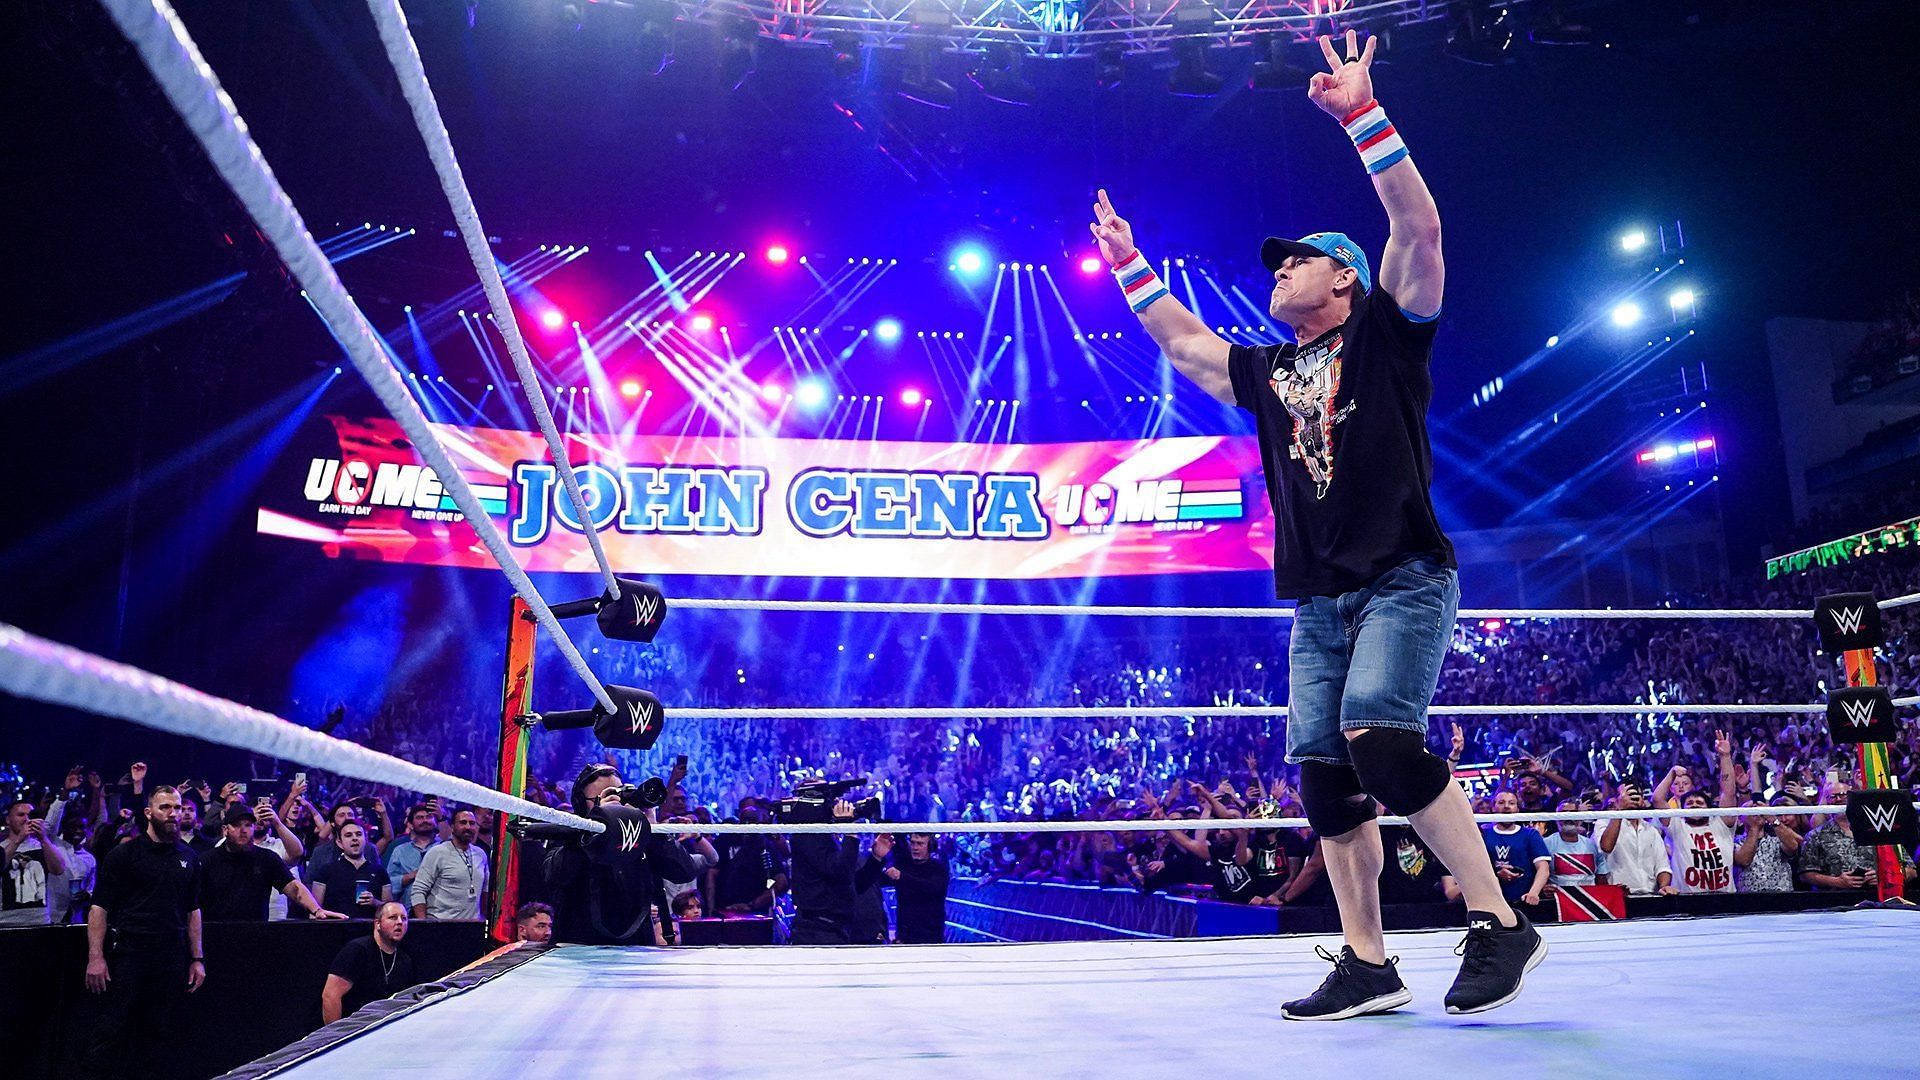 John Cena poses in the ring for the WWE Universe